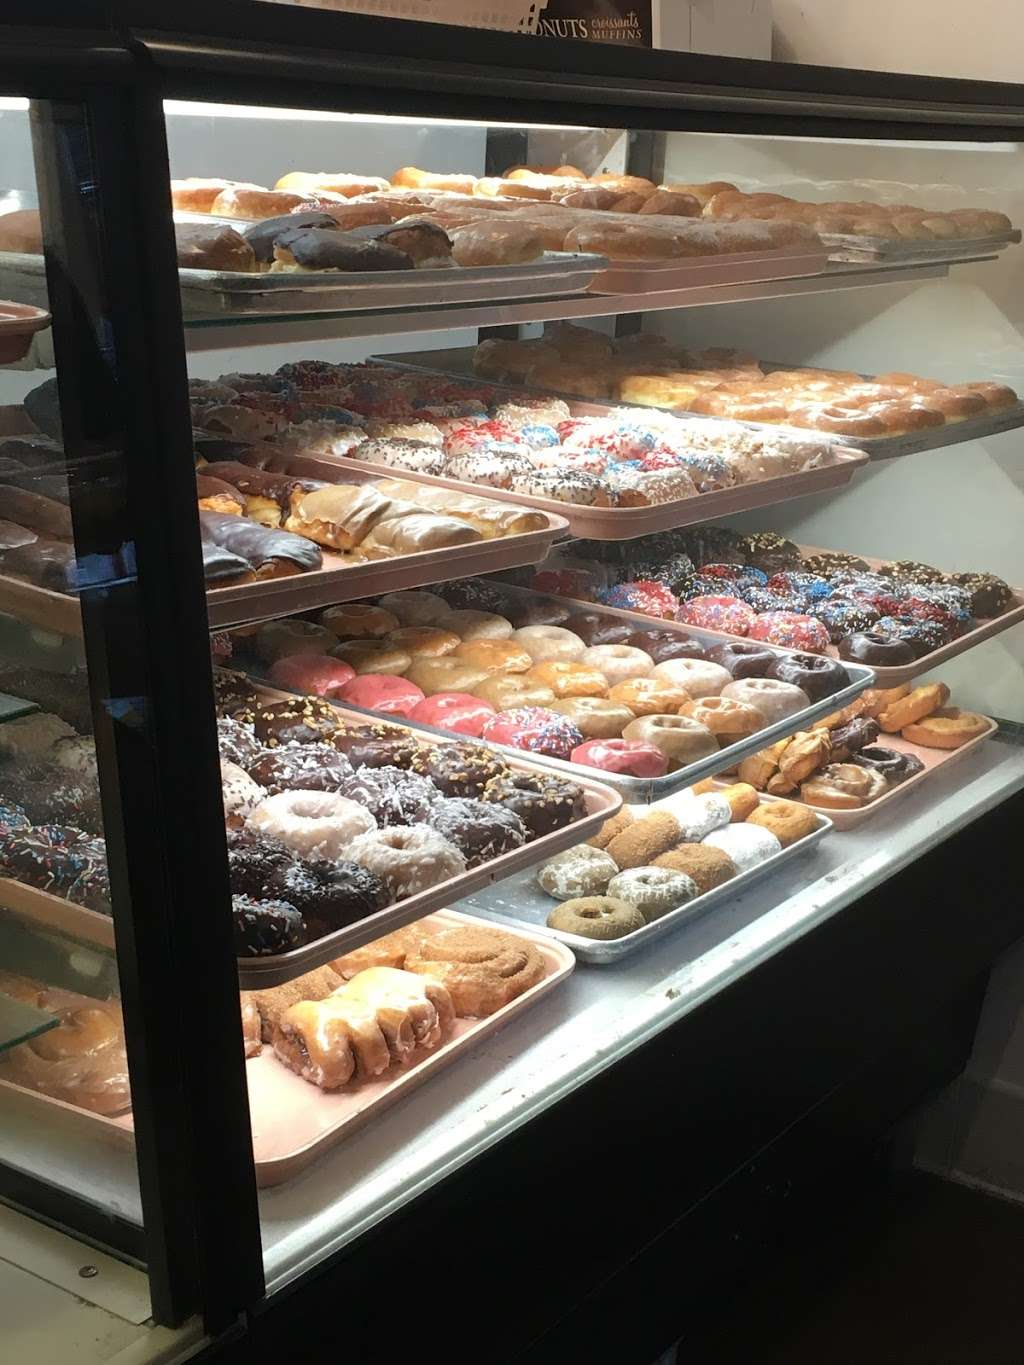 Mags Donuts & Bakery | 1280 Bison Ave # B1, Newport Beach, CA 92660 | Phone: (949) 760-9278